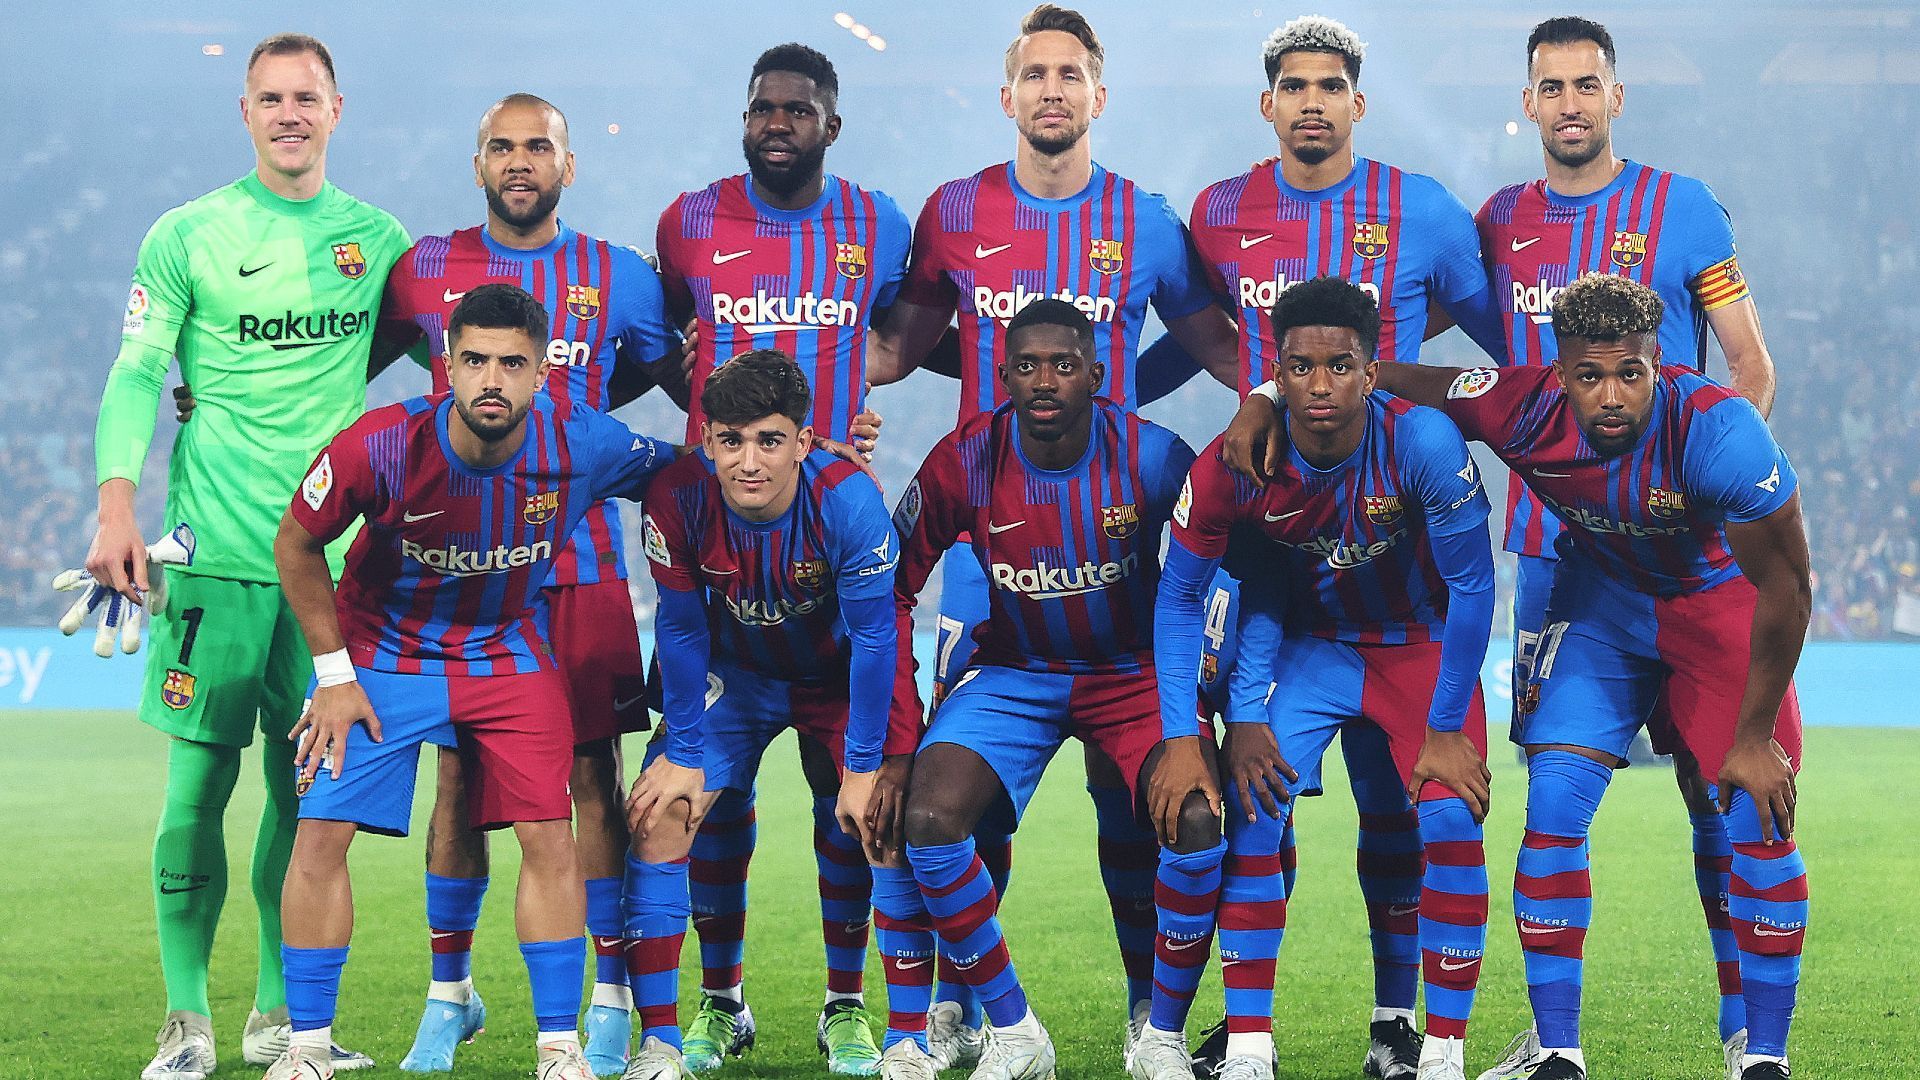 
                <strong>Topf 2 </strong><br>
                FC Barcelona - Zweiter in Spanien
              